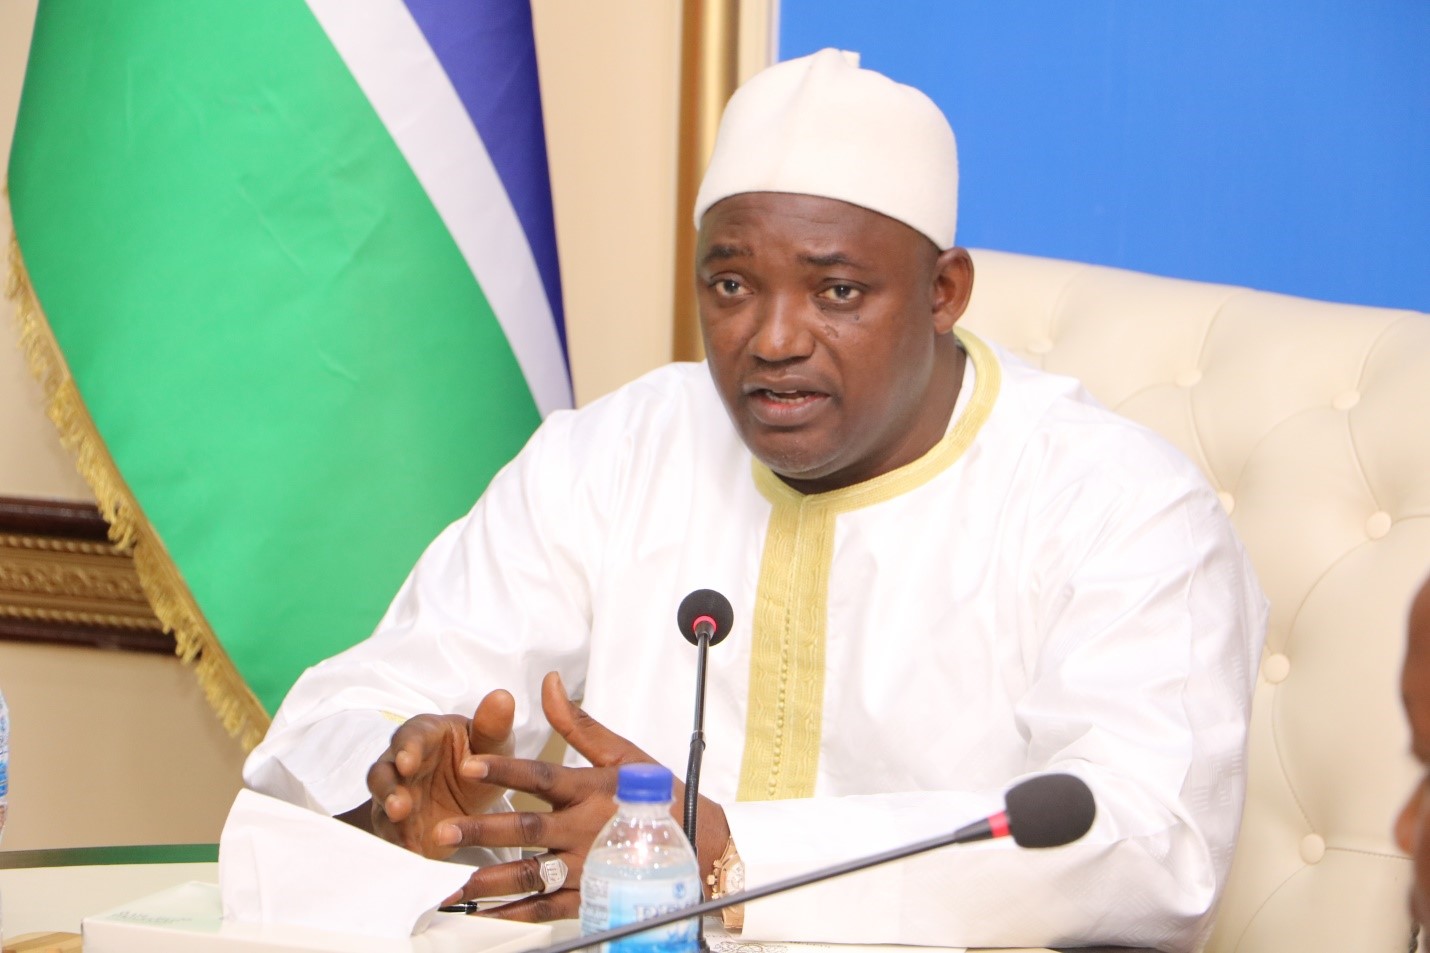 Gambia Procures Fleet of Buses to Ease Transport Constraints